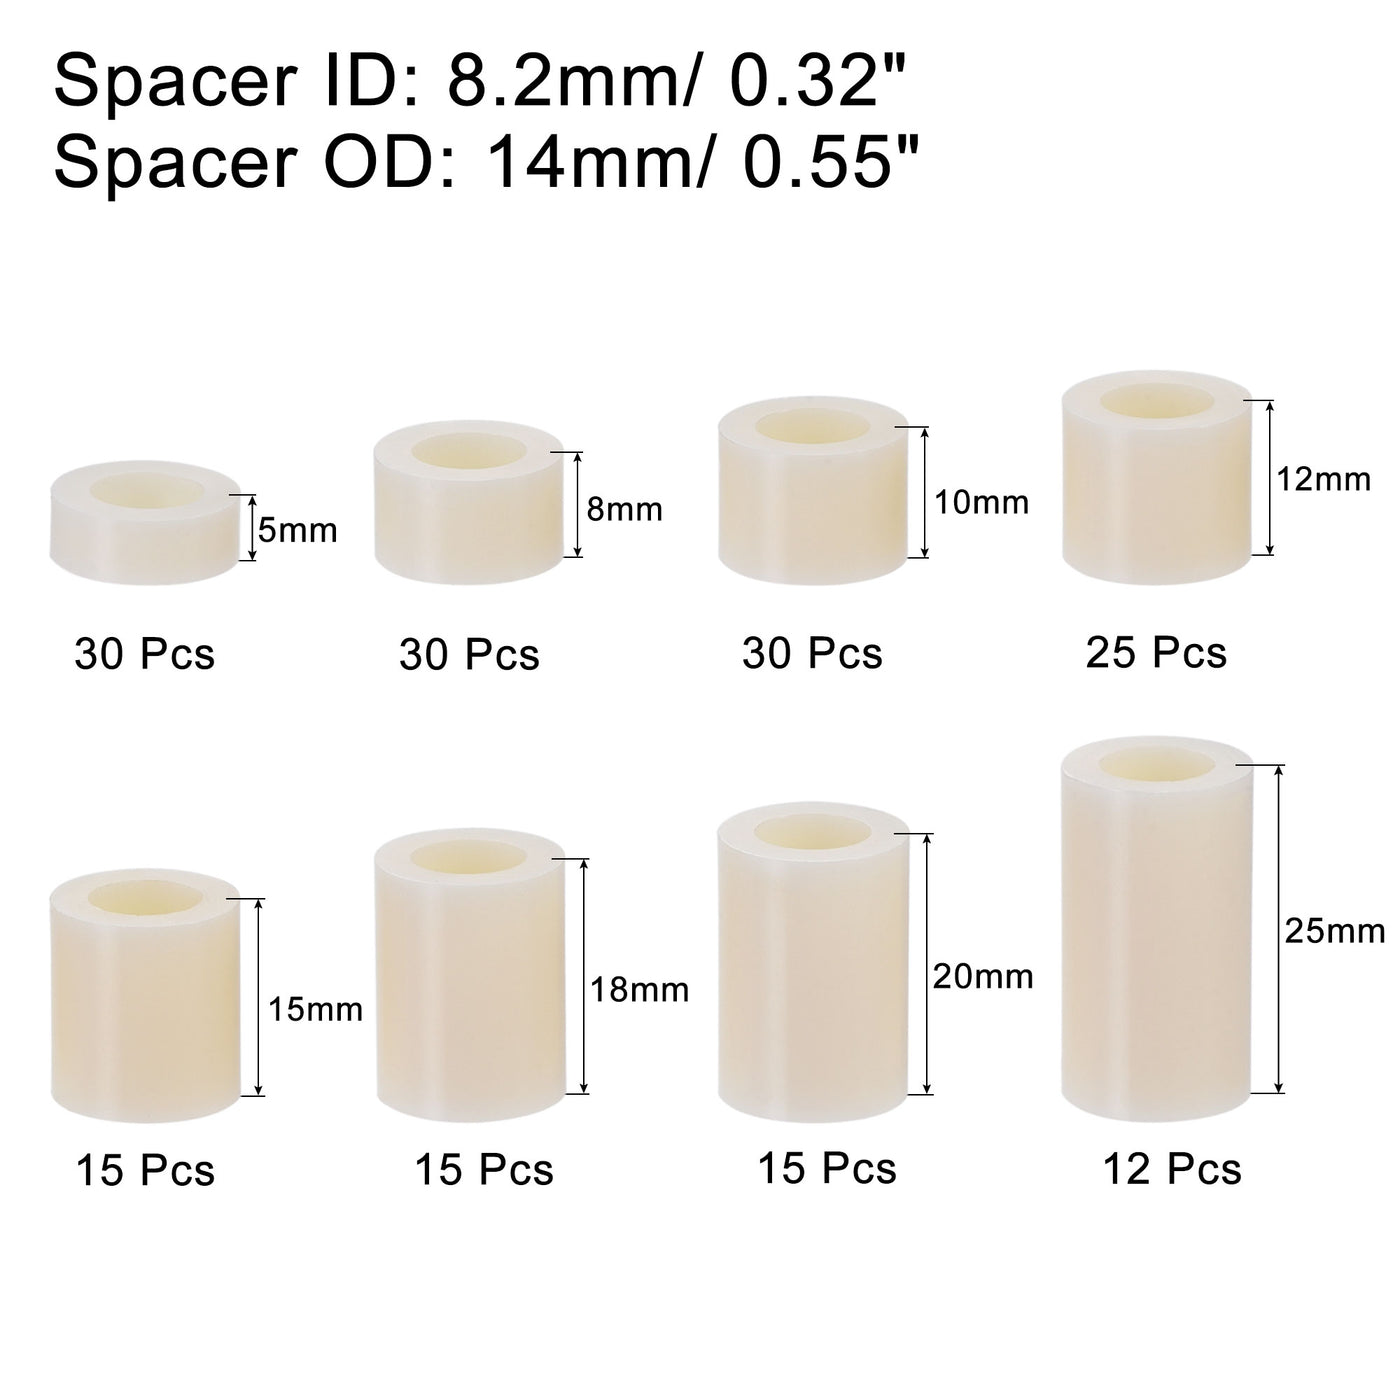 uxcell Uxcell ABS Round Spacer Assortment Kit ID 8.2mm OD 14mm, 8 Sizes Standoff, 172pcs